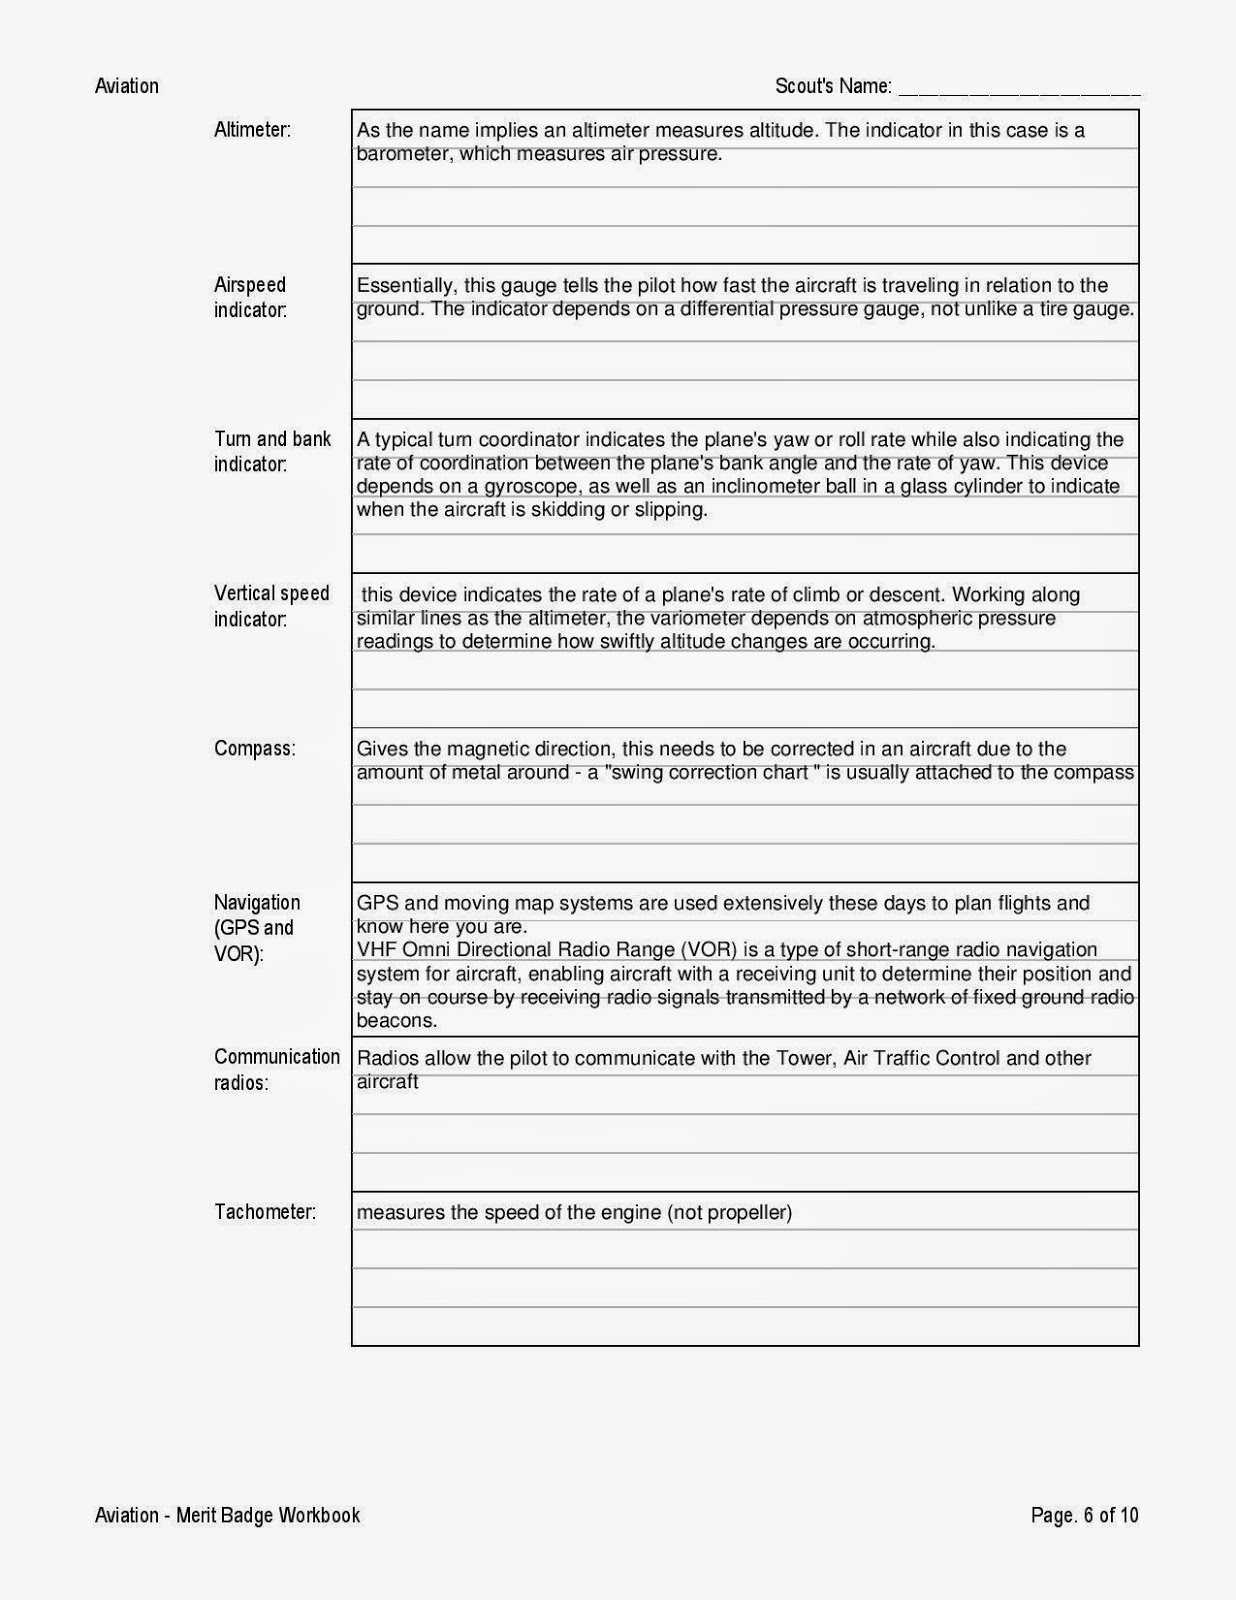 Chess Merit Badge Worksheet as Well as Scout Badge Worksheets the Best Worksheets Image Collection